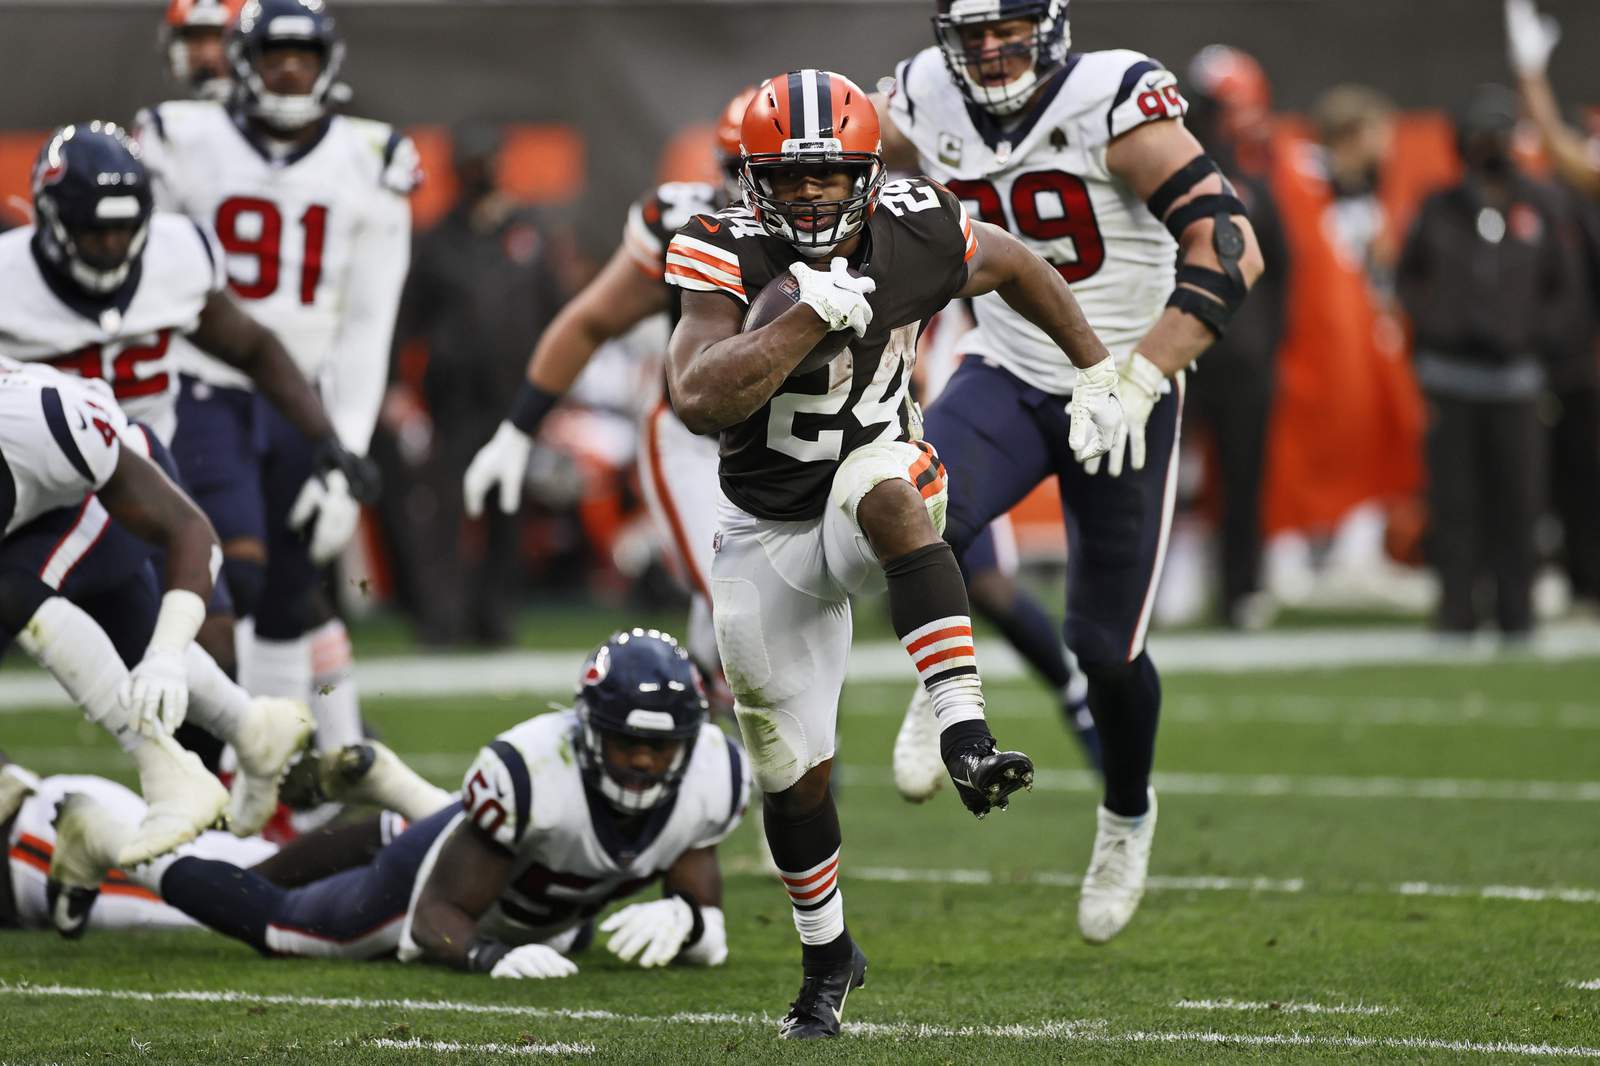 Chubb, Hunt push Browns past Texans 10-7 in wild weather